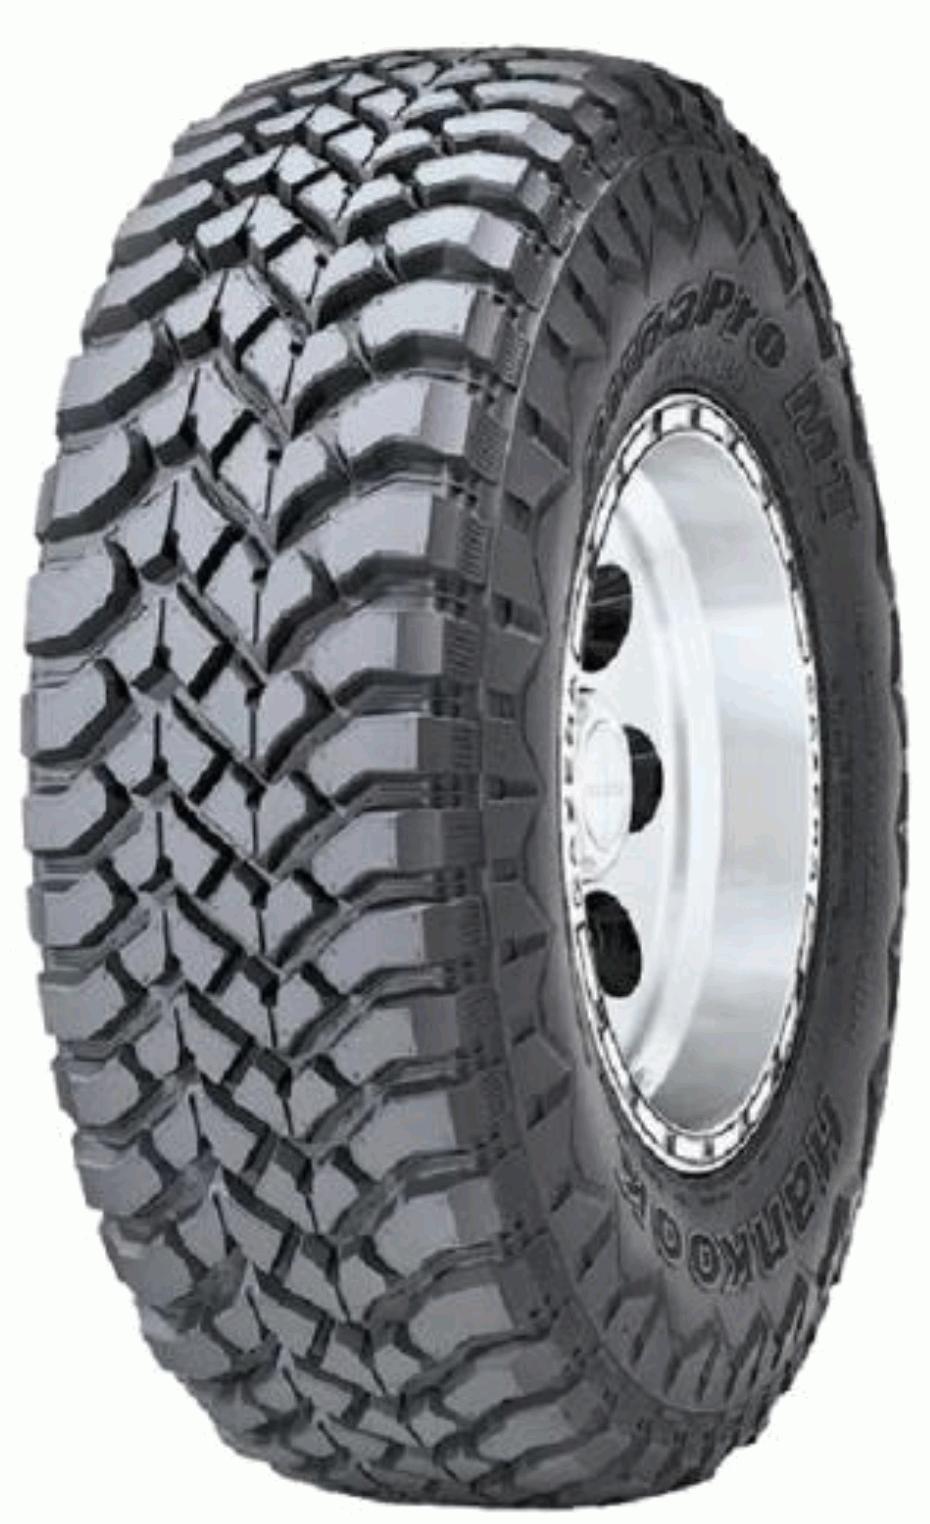 Hankook Dynapro MT - Tyre Reviews and Tests